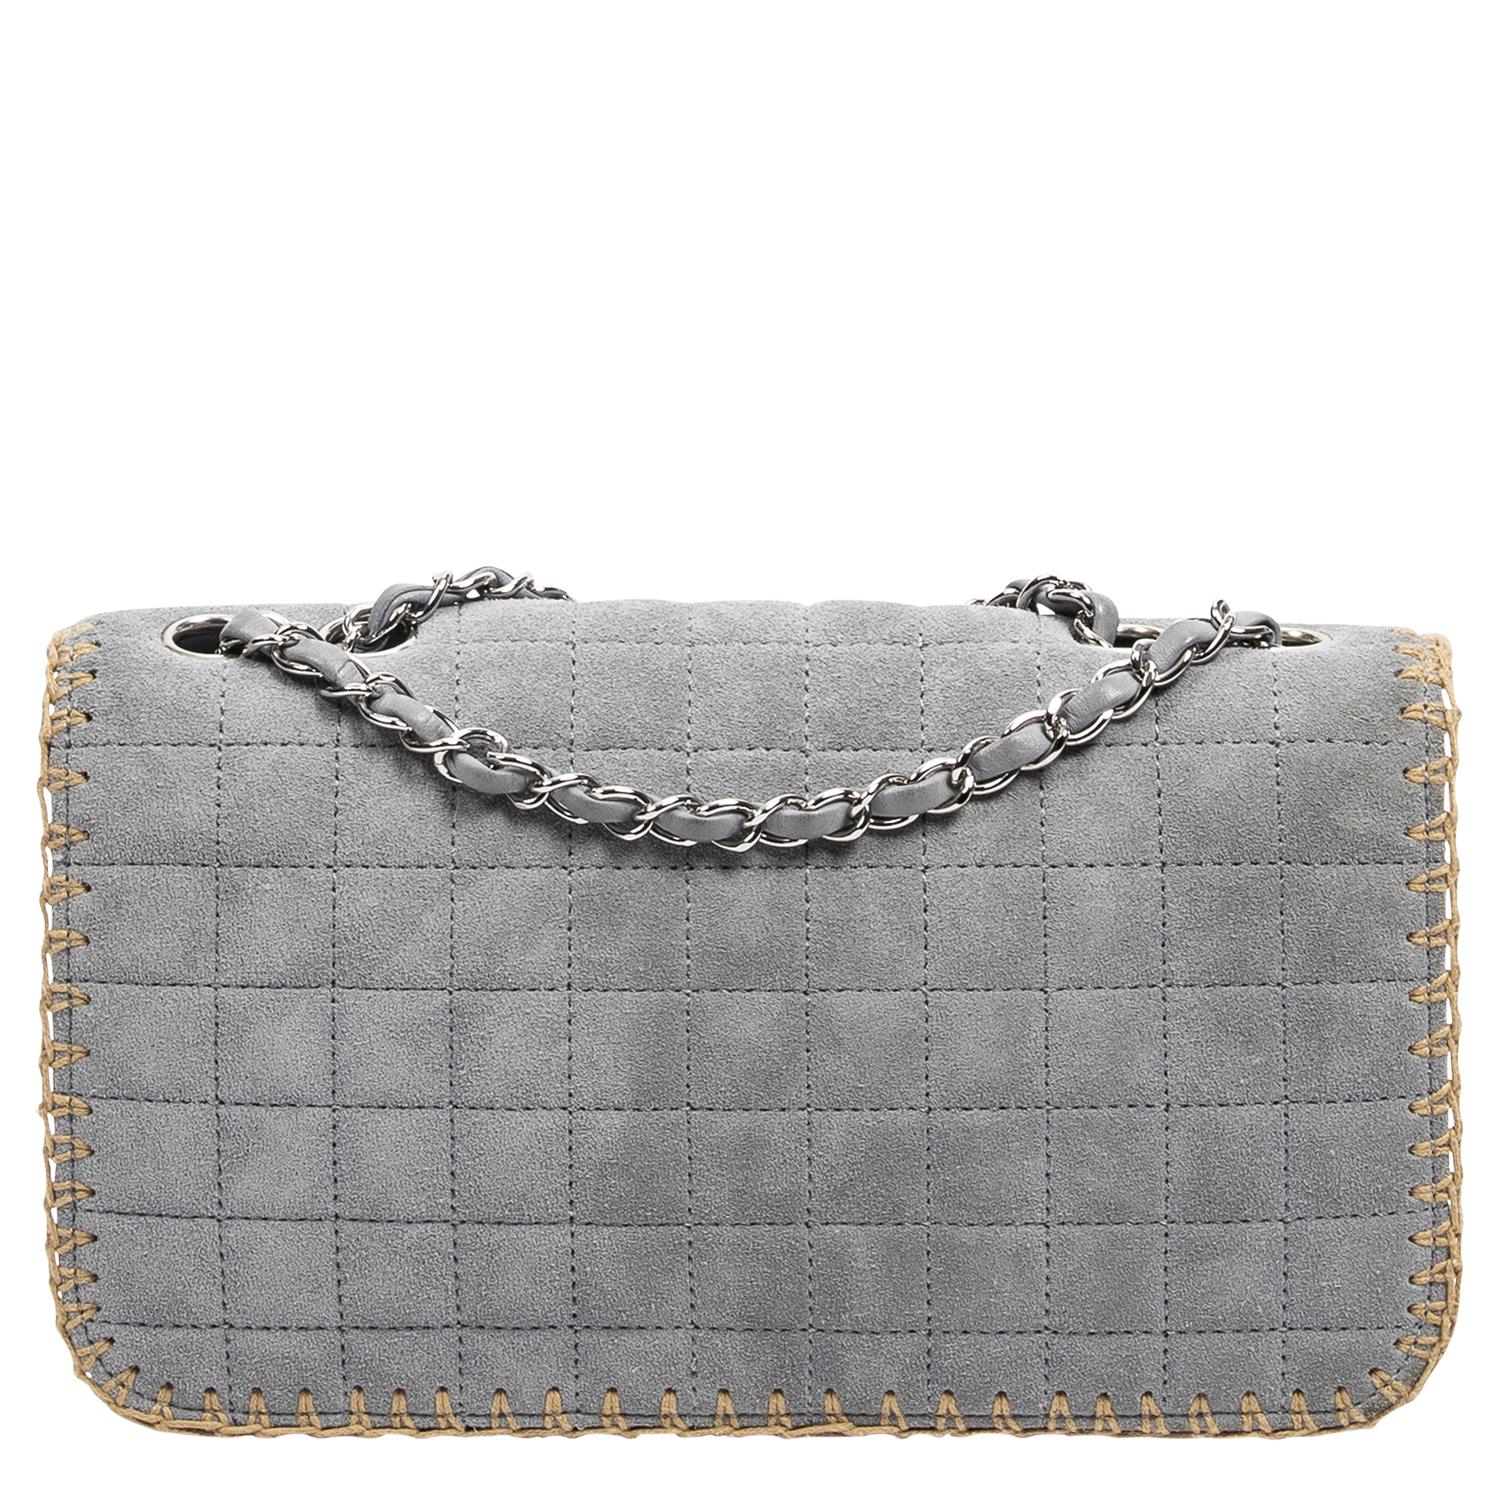 Gray Chanel 2005 Limited Edition Grey Suede Wild Stitch Shoulder Bag For Sale